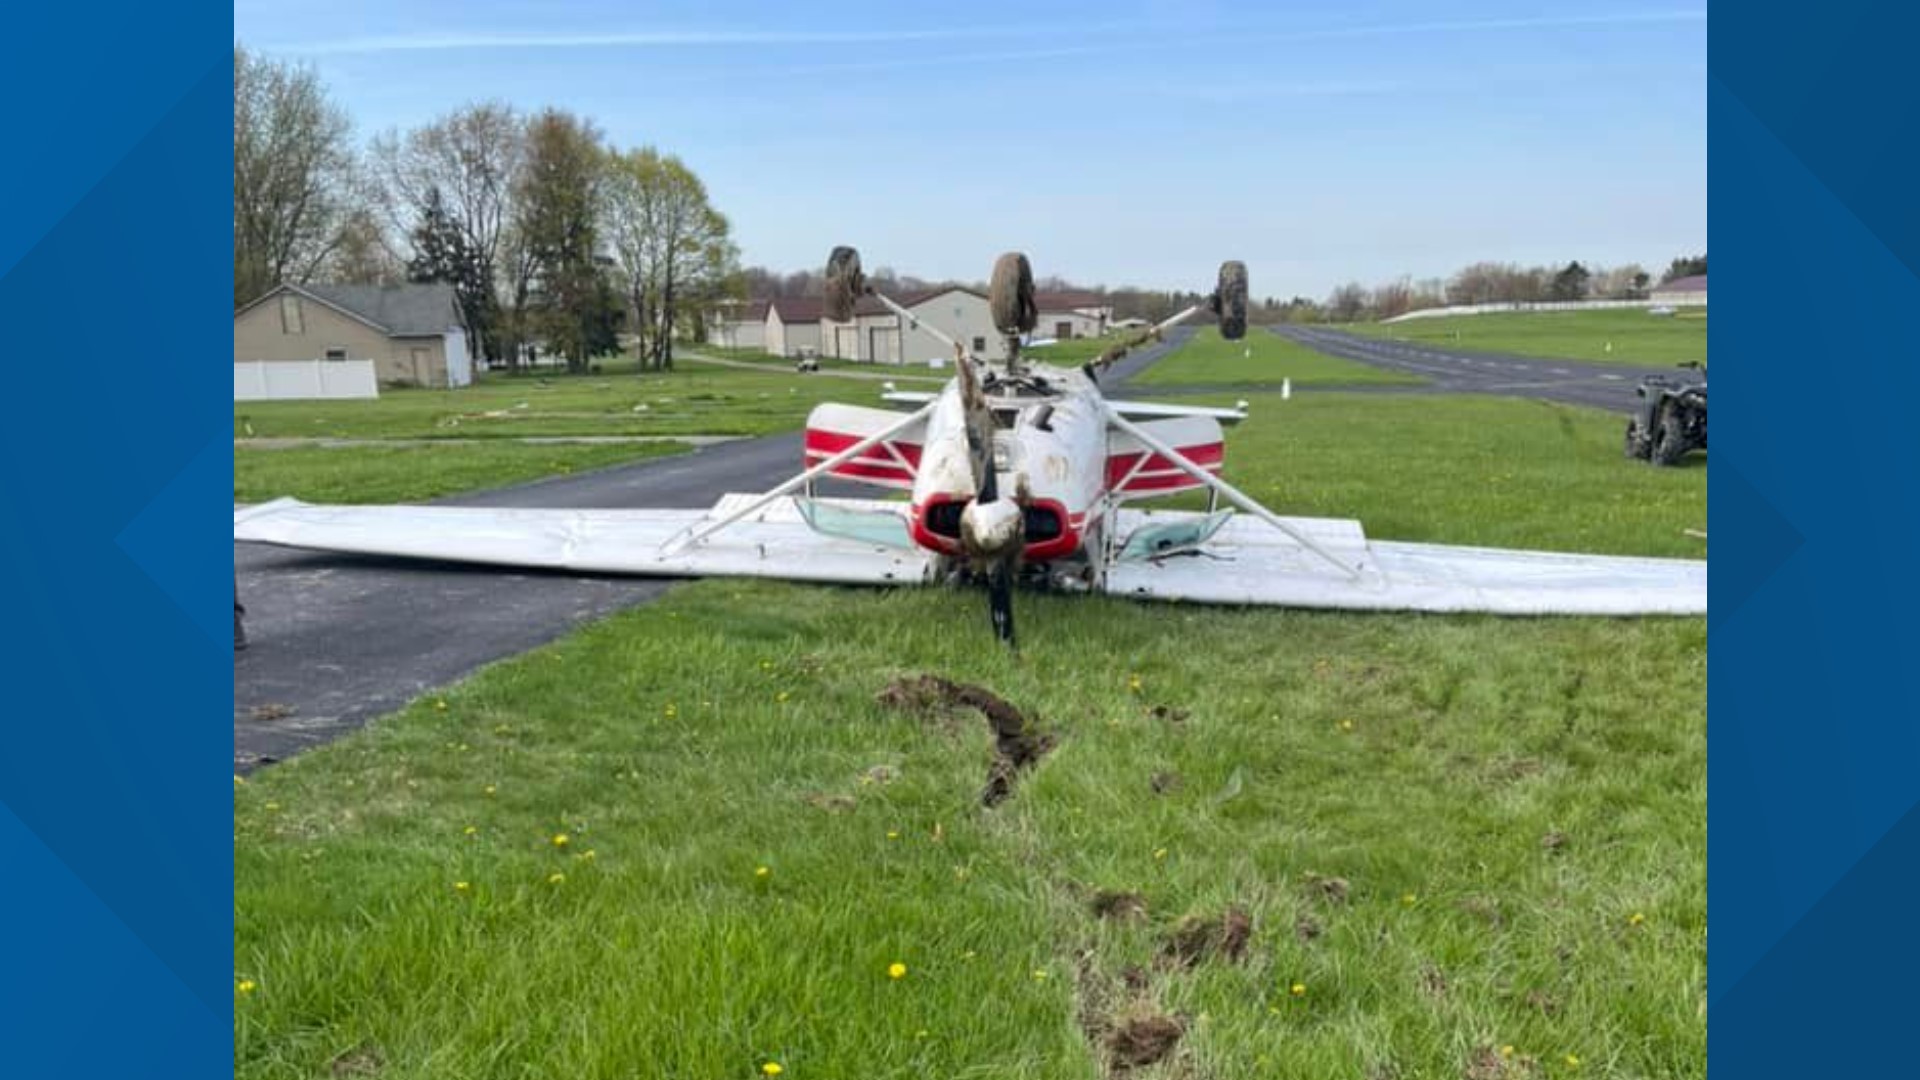 Authorities say the plane was attempting to land at Skypark Airport went it went off the runway before flipping over on its roof.